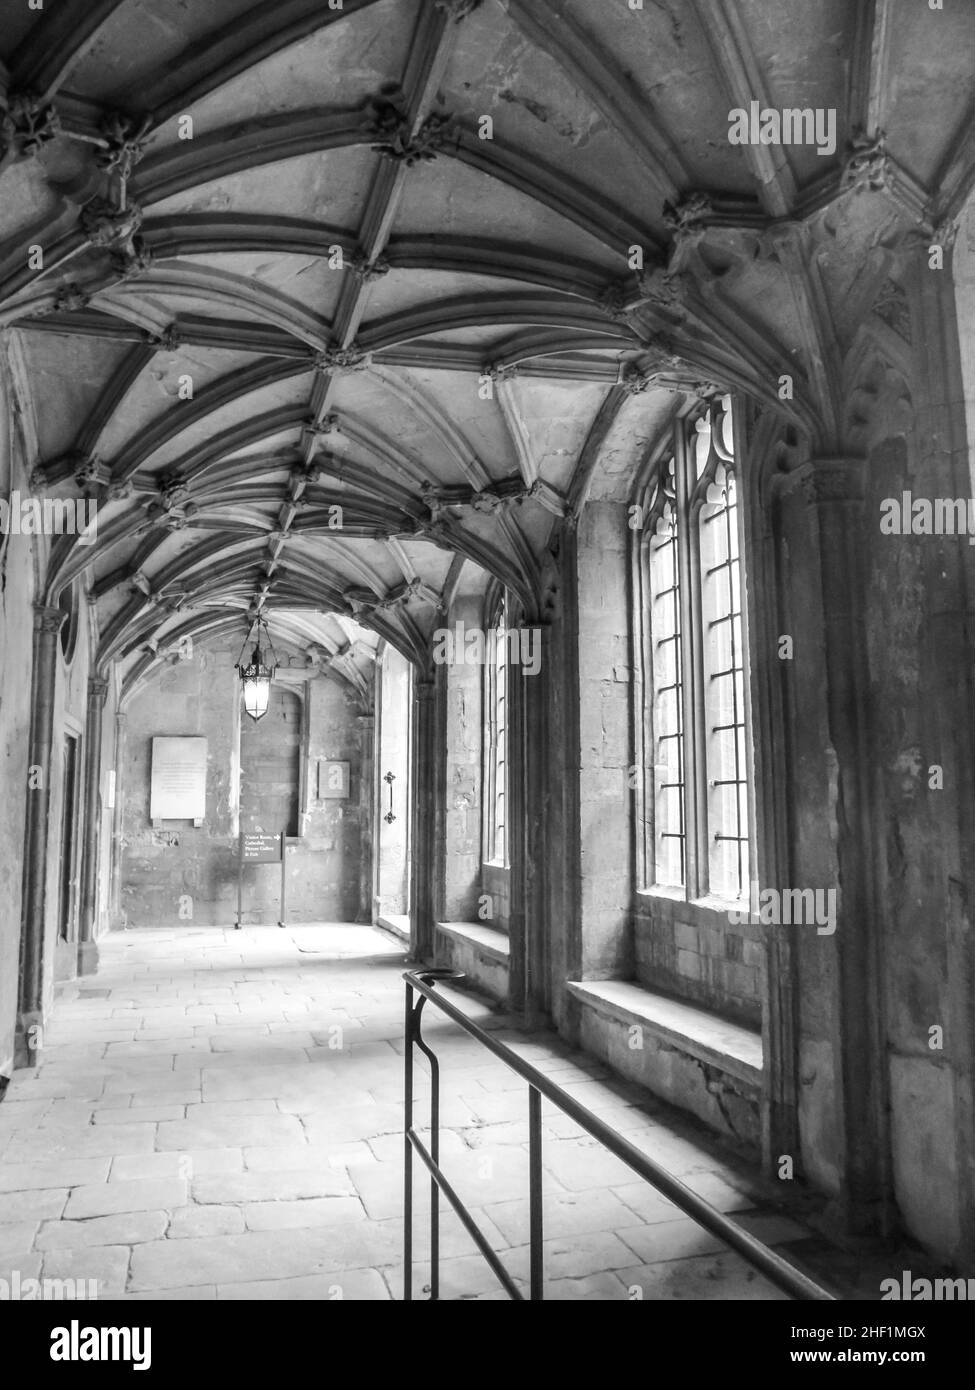 A hallway with a gothic stone ceiling in black and white. Stock Photo